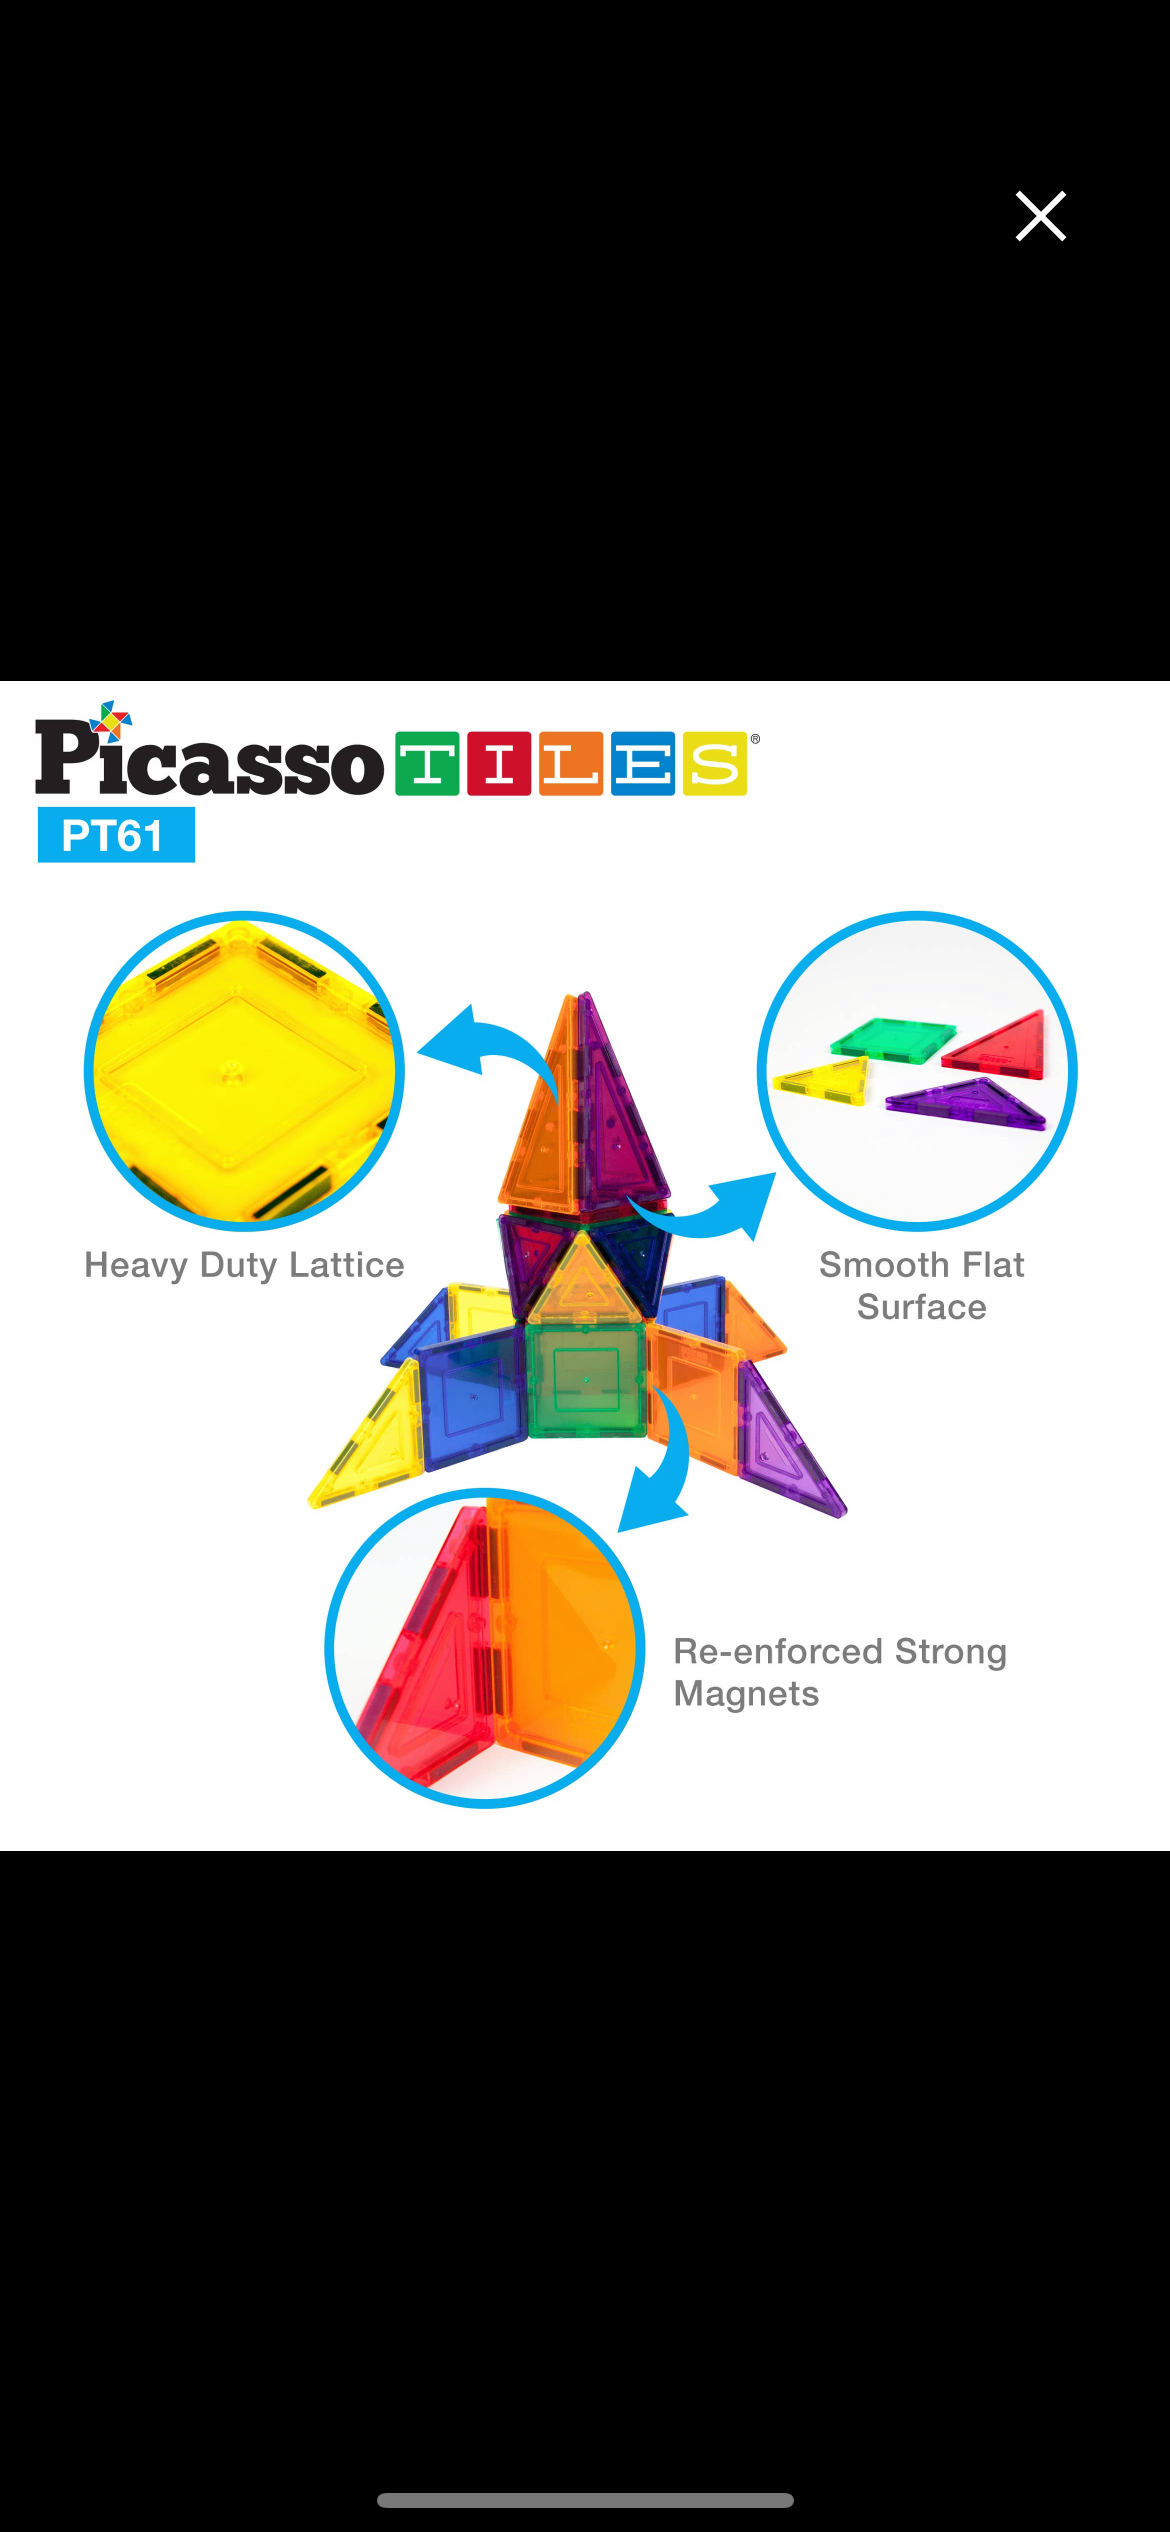 Picasso magnetic tiles: 61 pieces